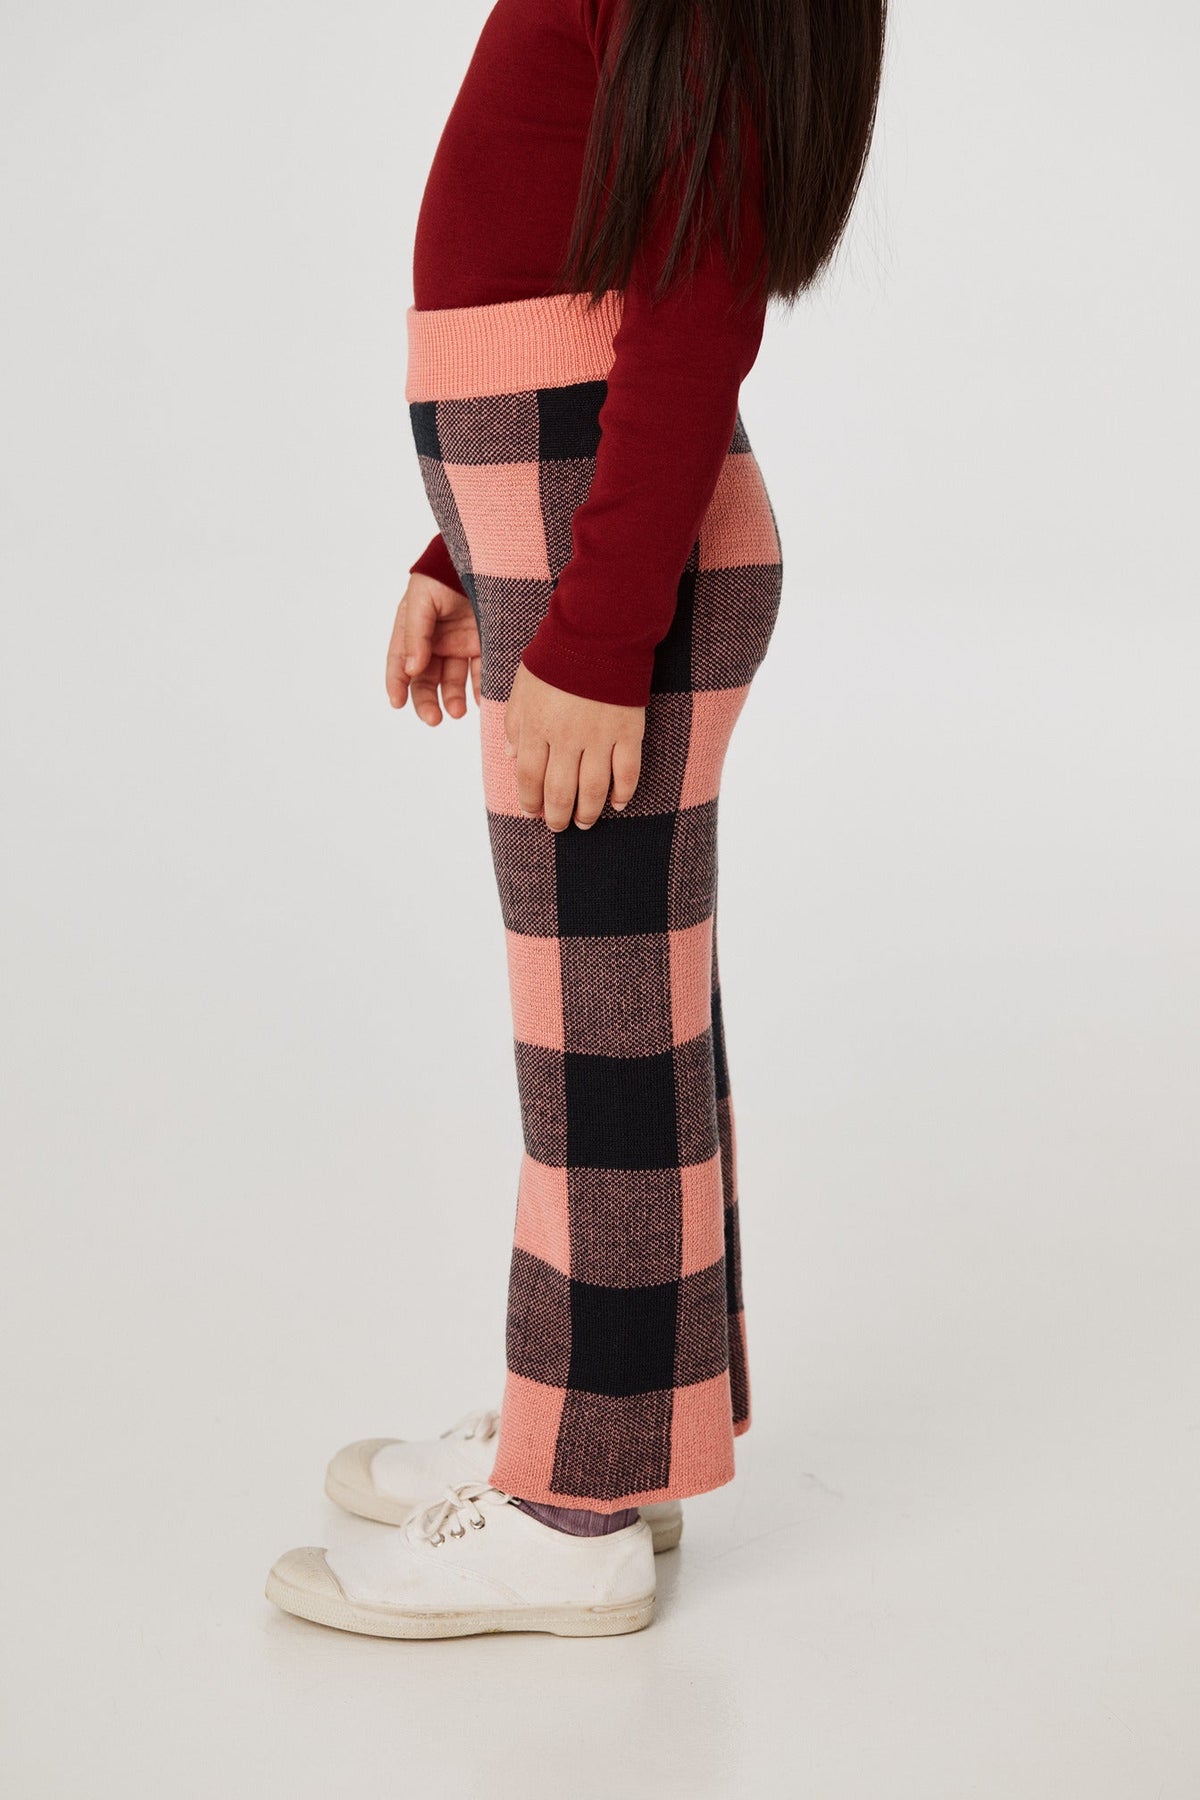 Plaid Slim Pant - Grapefruit+Model is 41 inches tall, 38lbs, wearing a size 4-5y